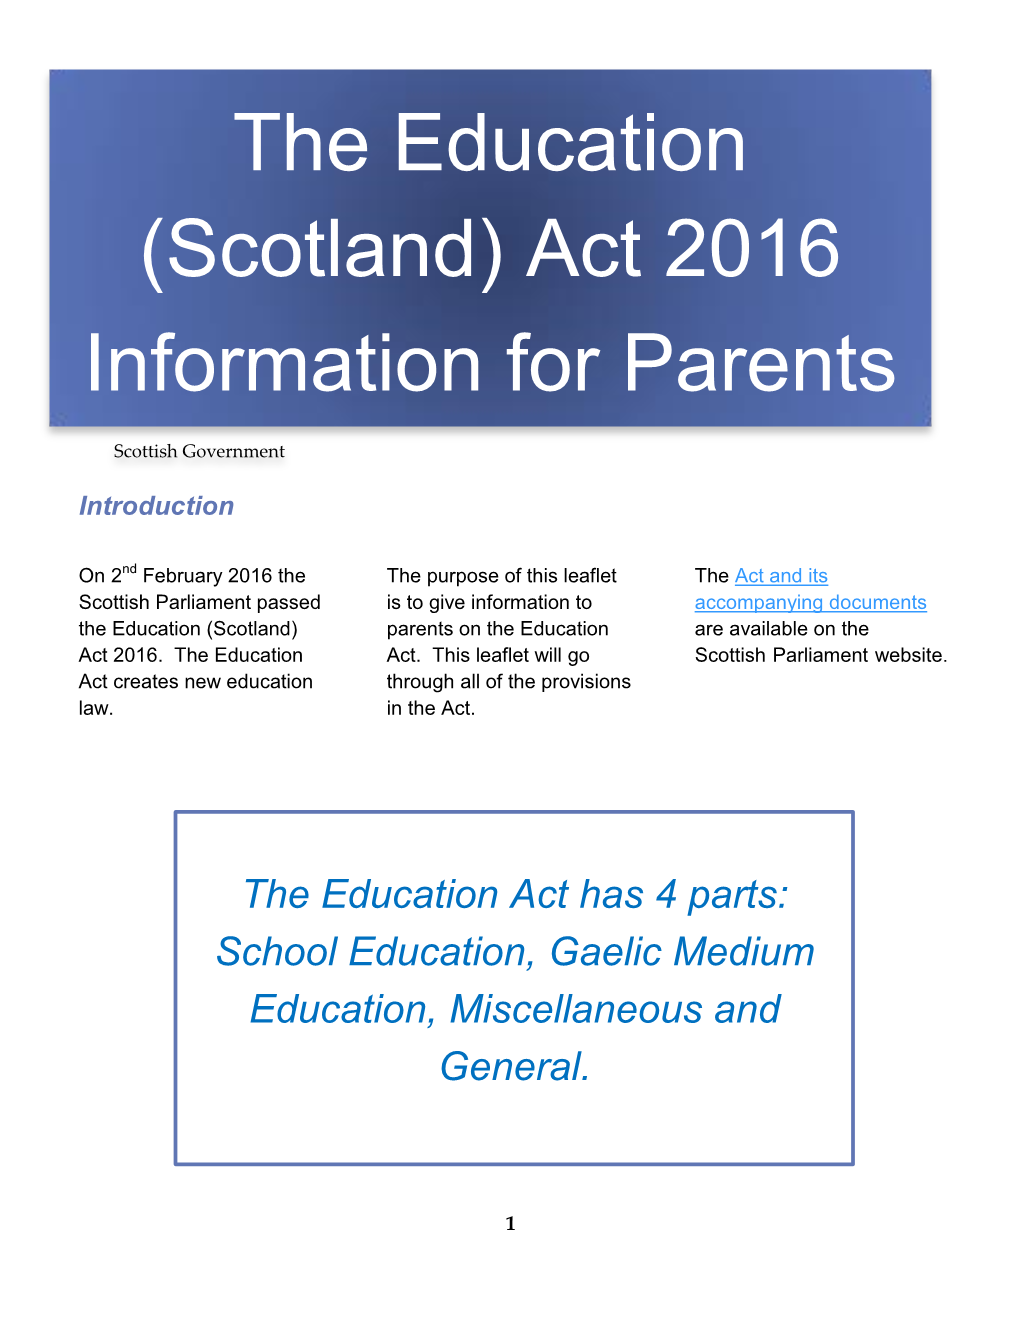 The Education (Scotland) Act 2016 Information for Parents